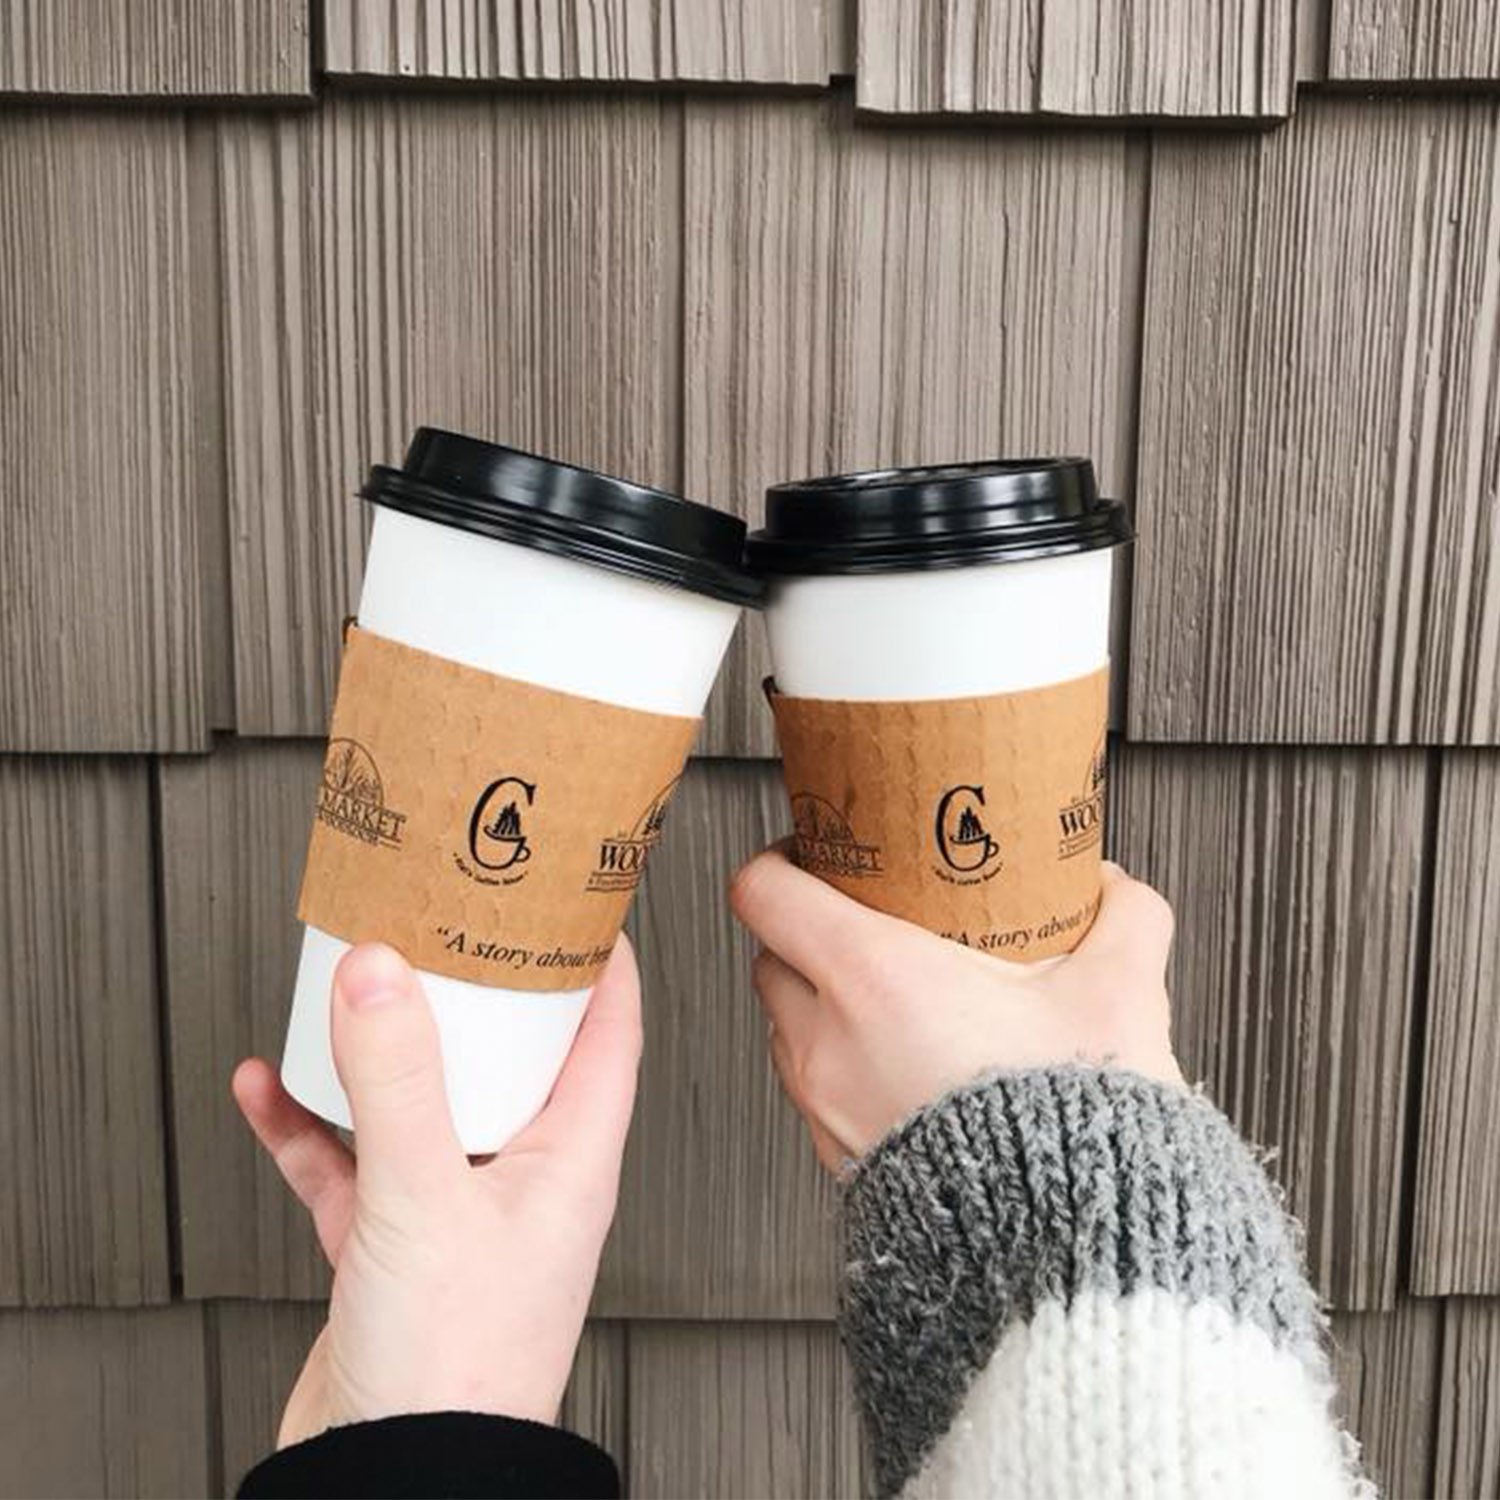 Hands clinking to-go coffee cups